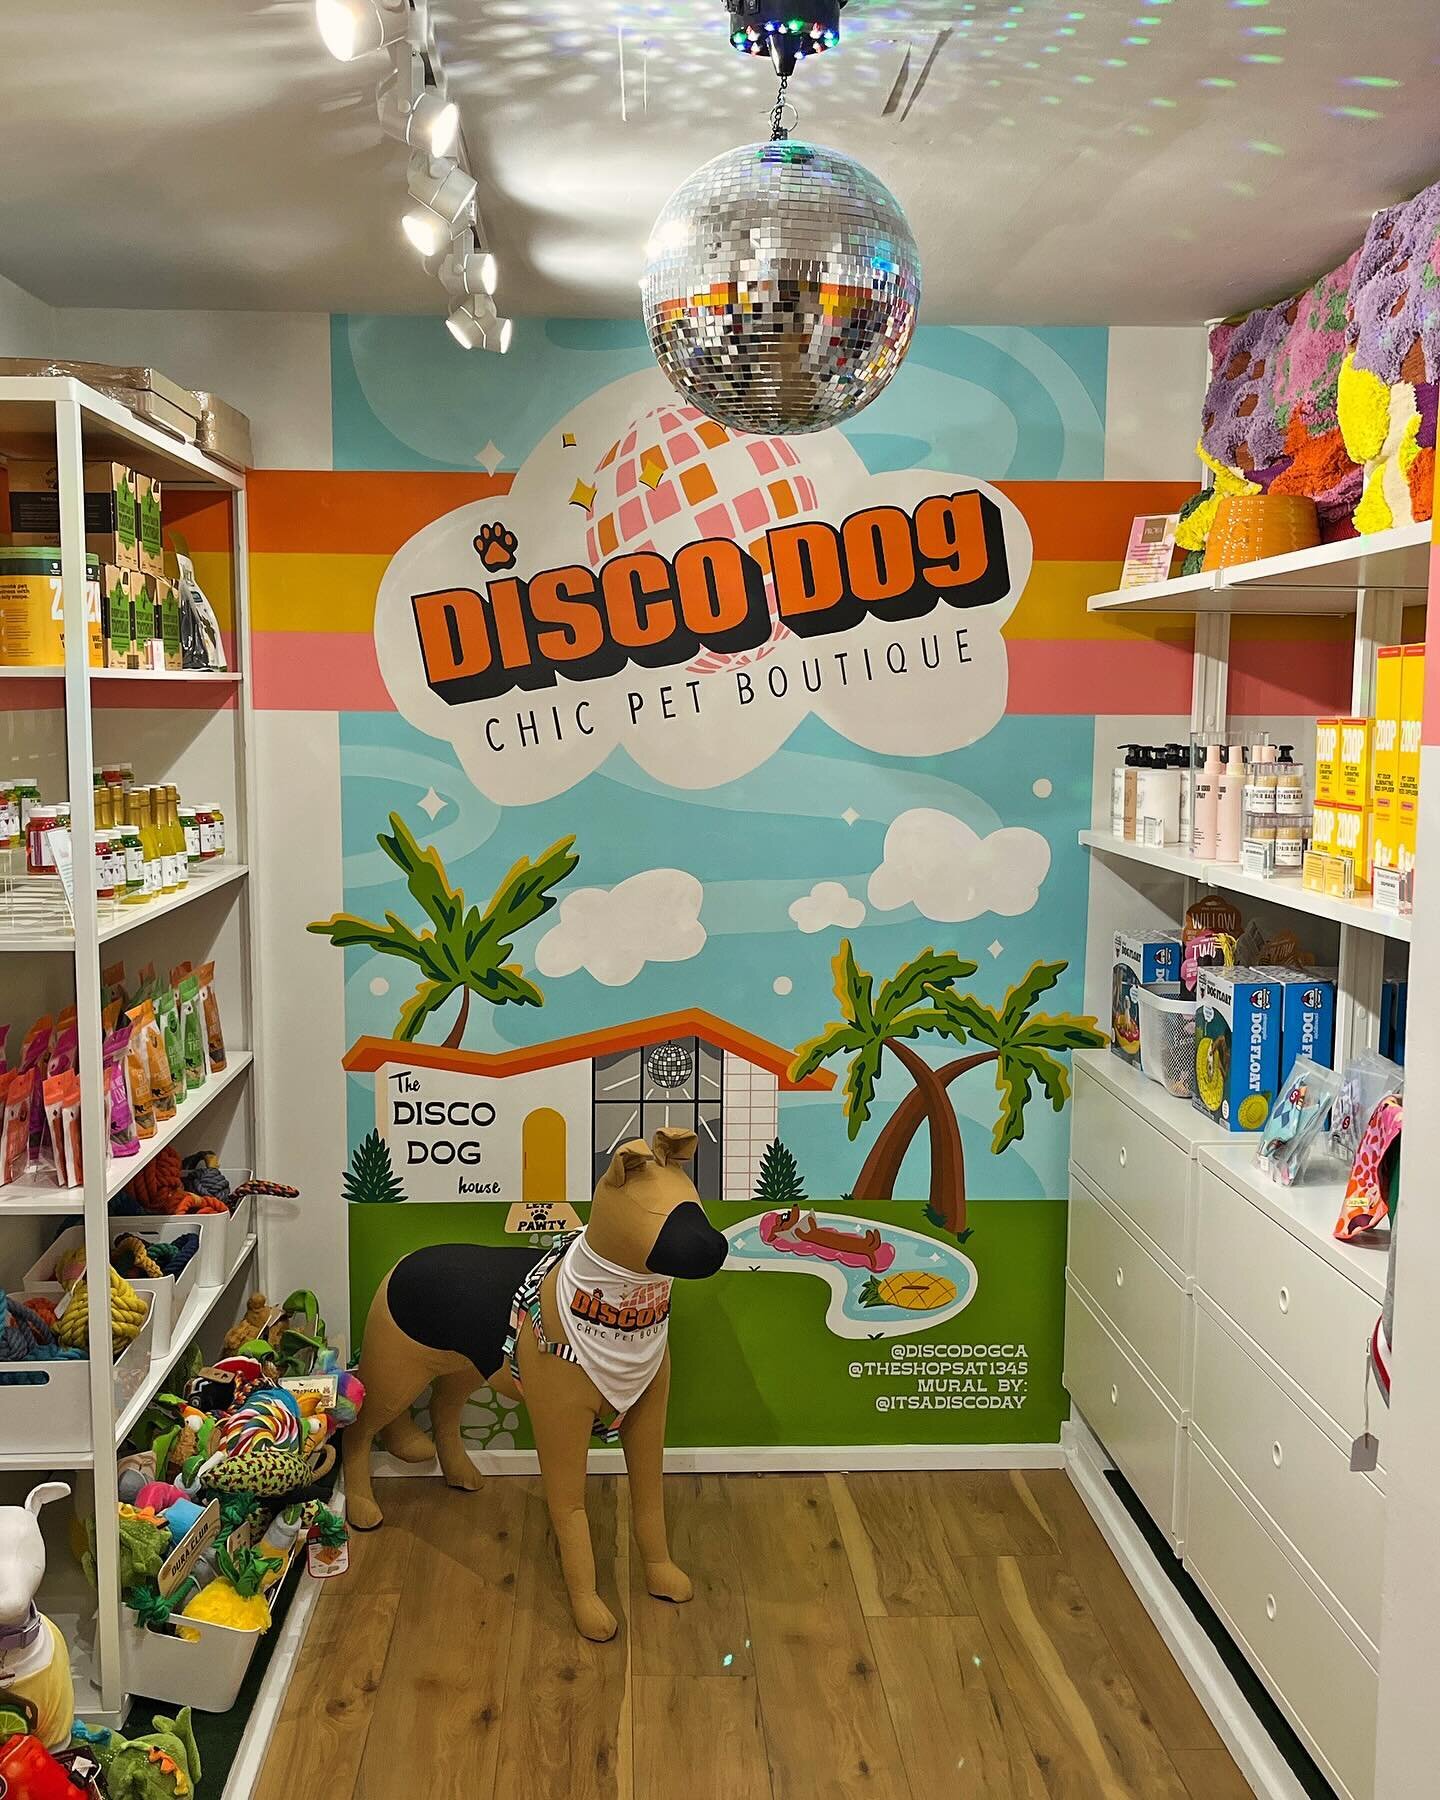 The Disco Dog is here! Check out @discodogca now open at @theshopsat1345 🛍️
Can you possibly have any greater fun with a branding and interior design project than one involving super cute pets, brightly colored hues and shiny mirror balls? The answe